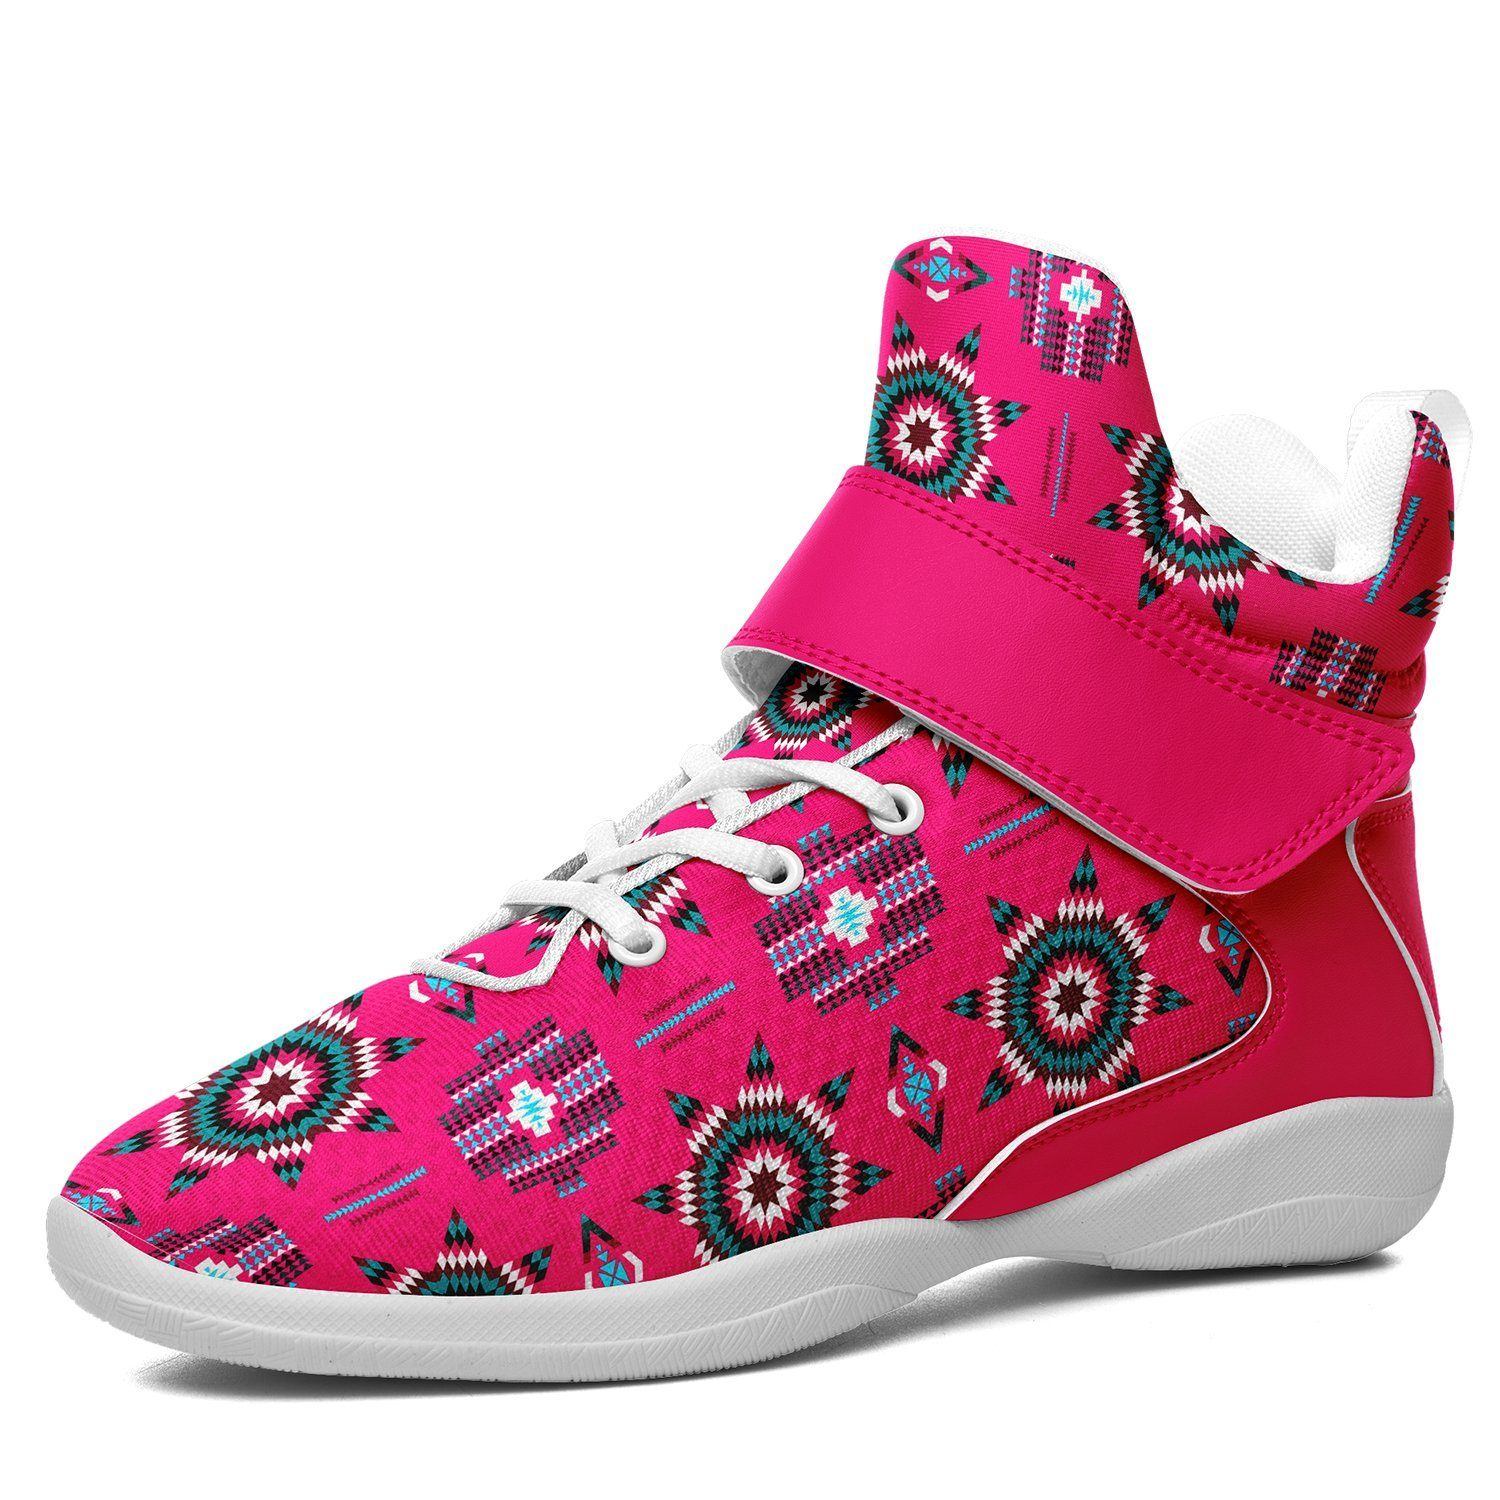 Rising Star Strawberry Moon Kid's Ipottaa Basketball / Sport High Top Shoes 49 Dzine US Child 12.5 / EUR 30 White Sole with Pink Strap 